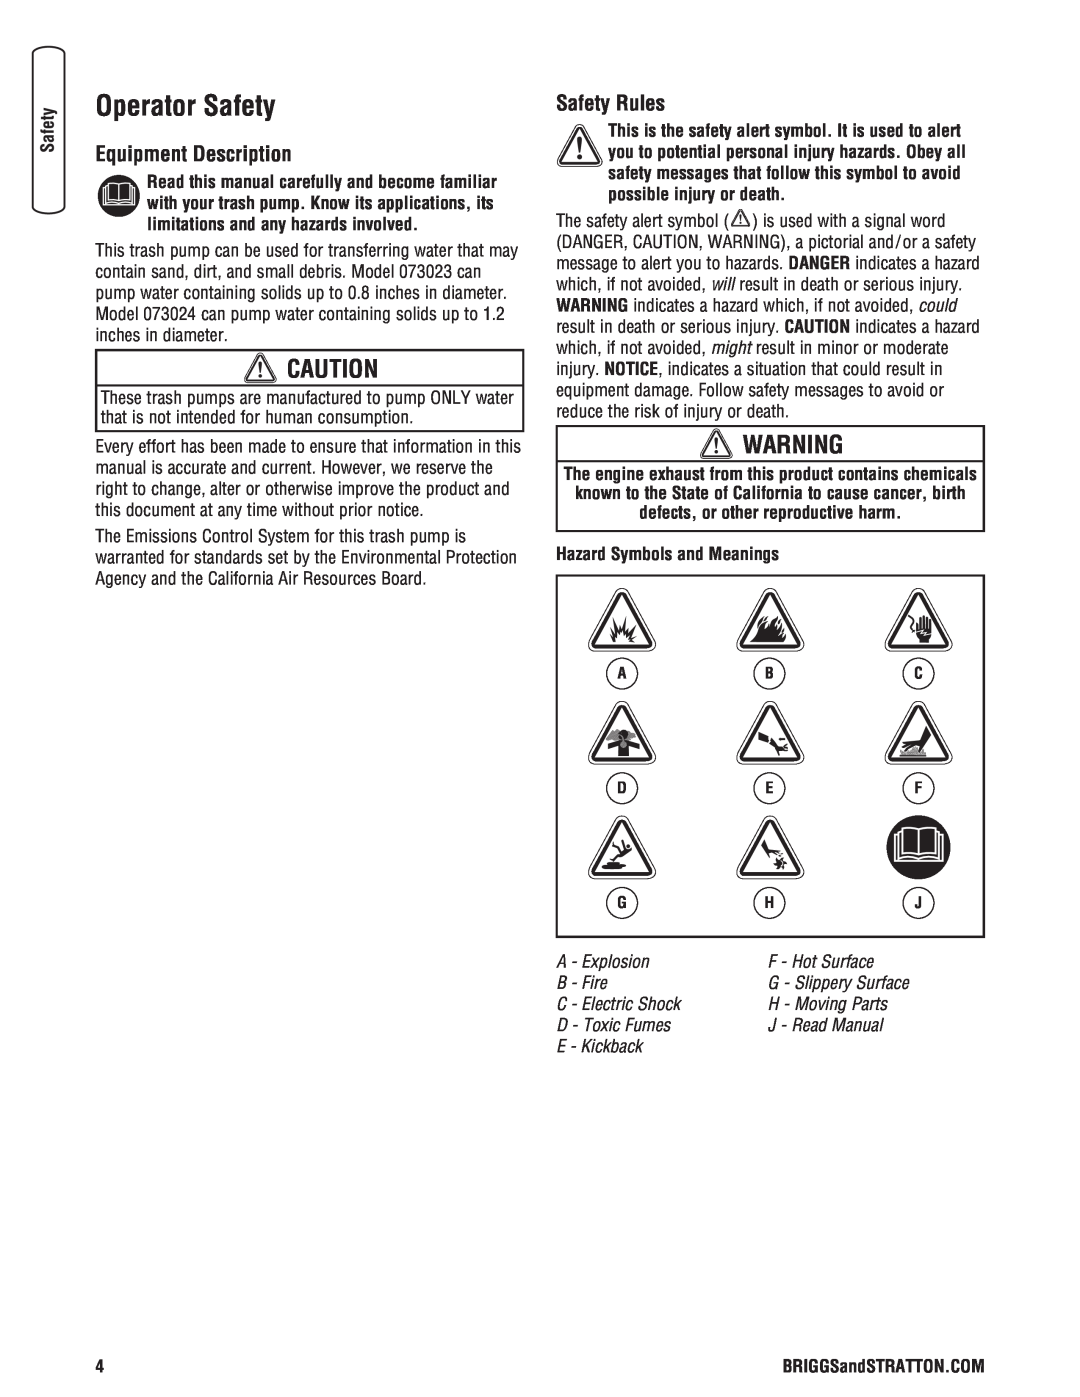 Briggs & Stratton 205378GS Operator Safety, Equipment Description, Safety Rules, Hazard Symbols and Meanings, B - Fire 